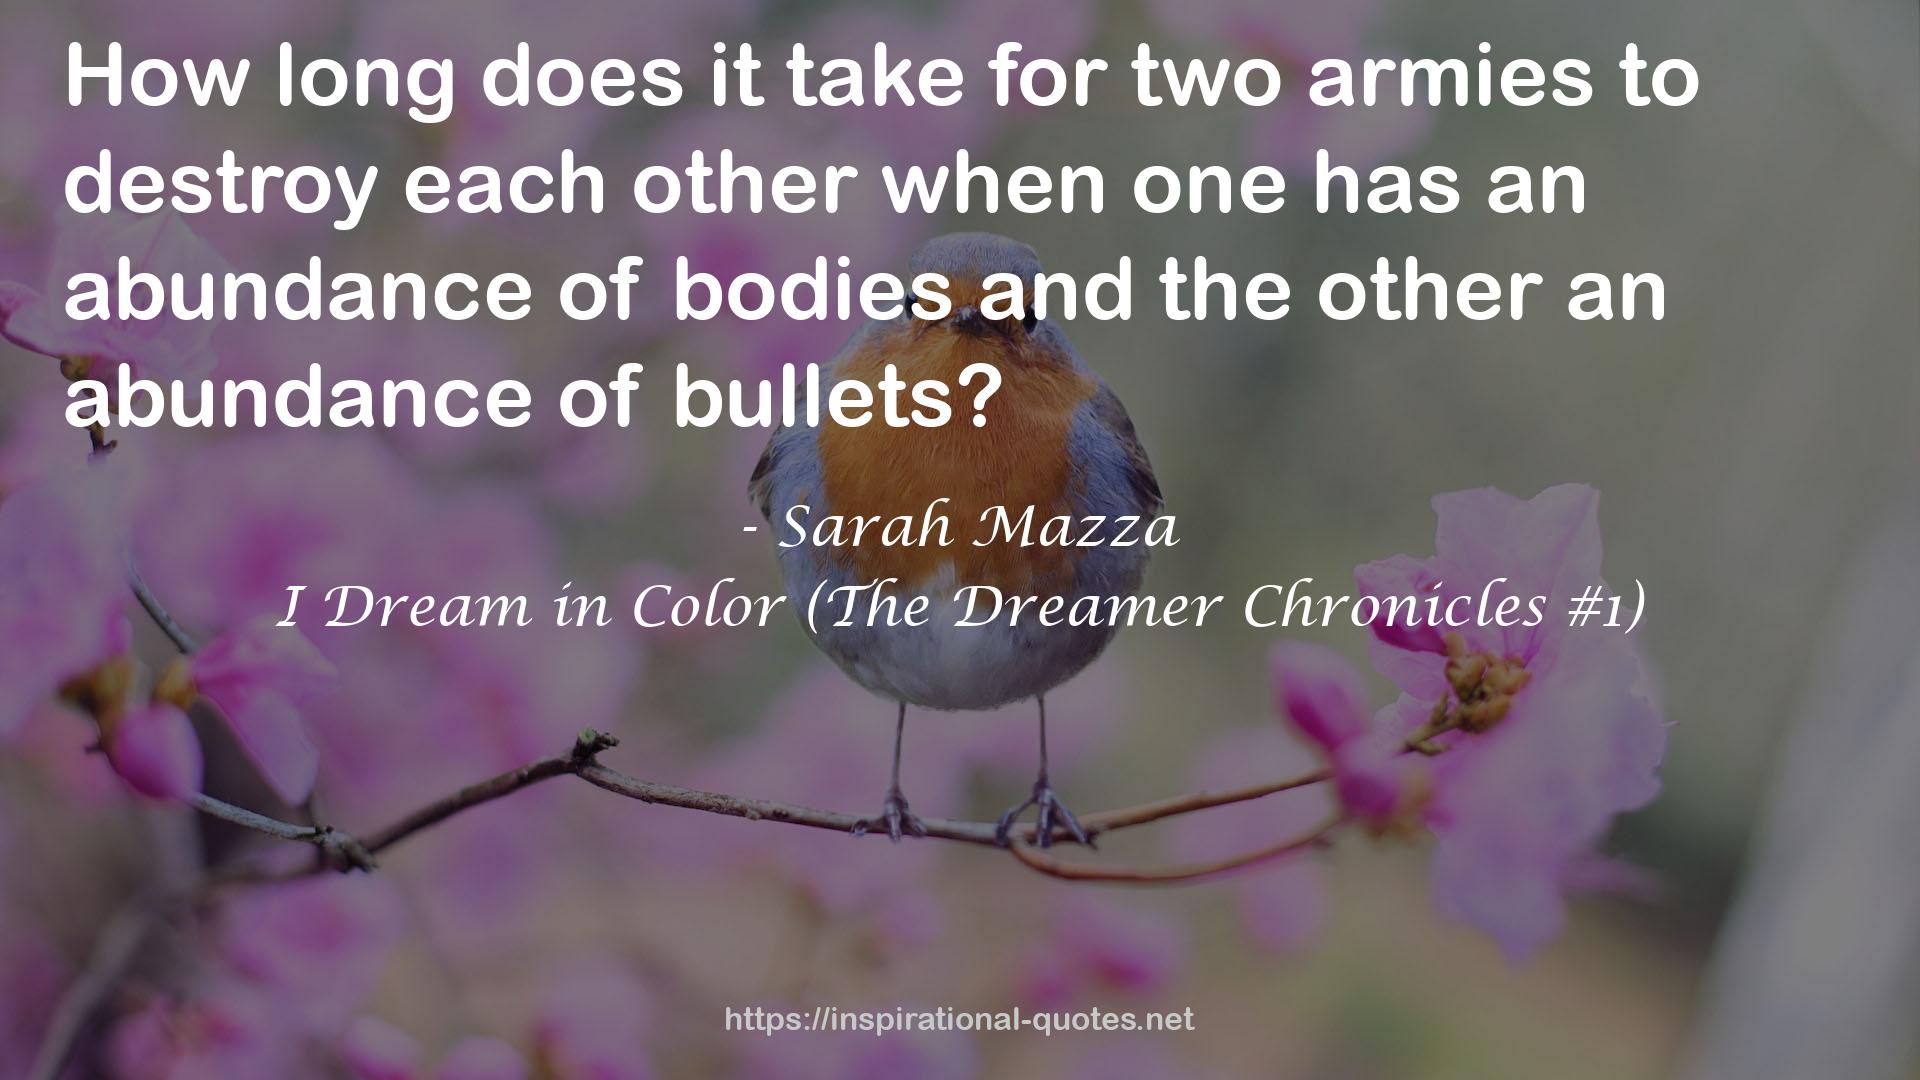 I Dream in Color (The Dreamer Chronicles #1) QUOTES